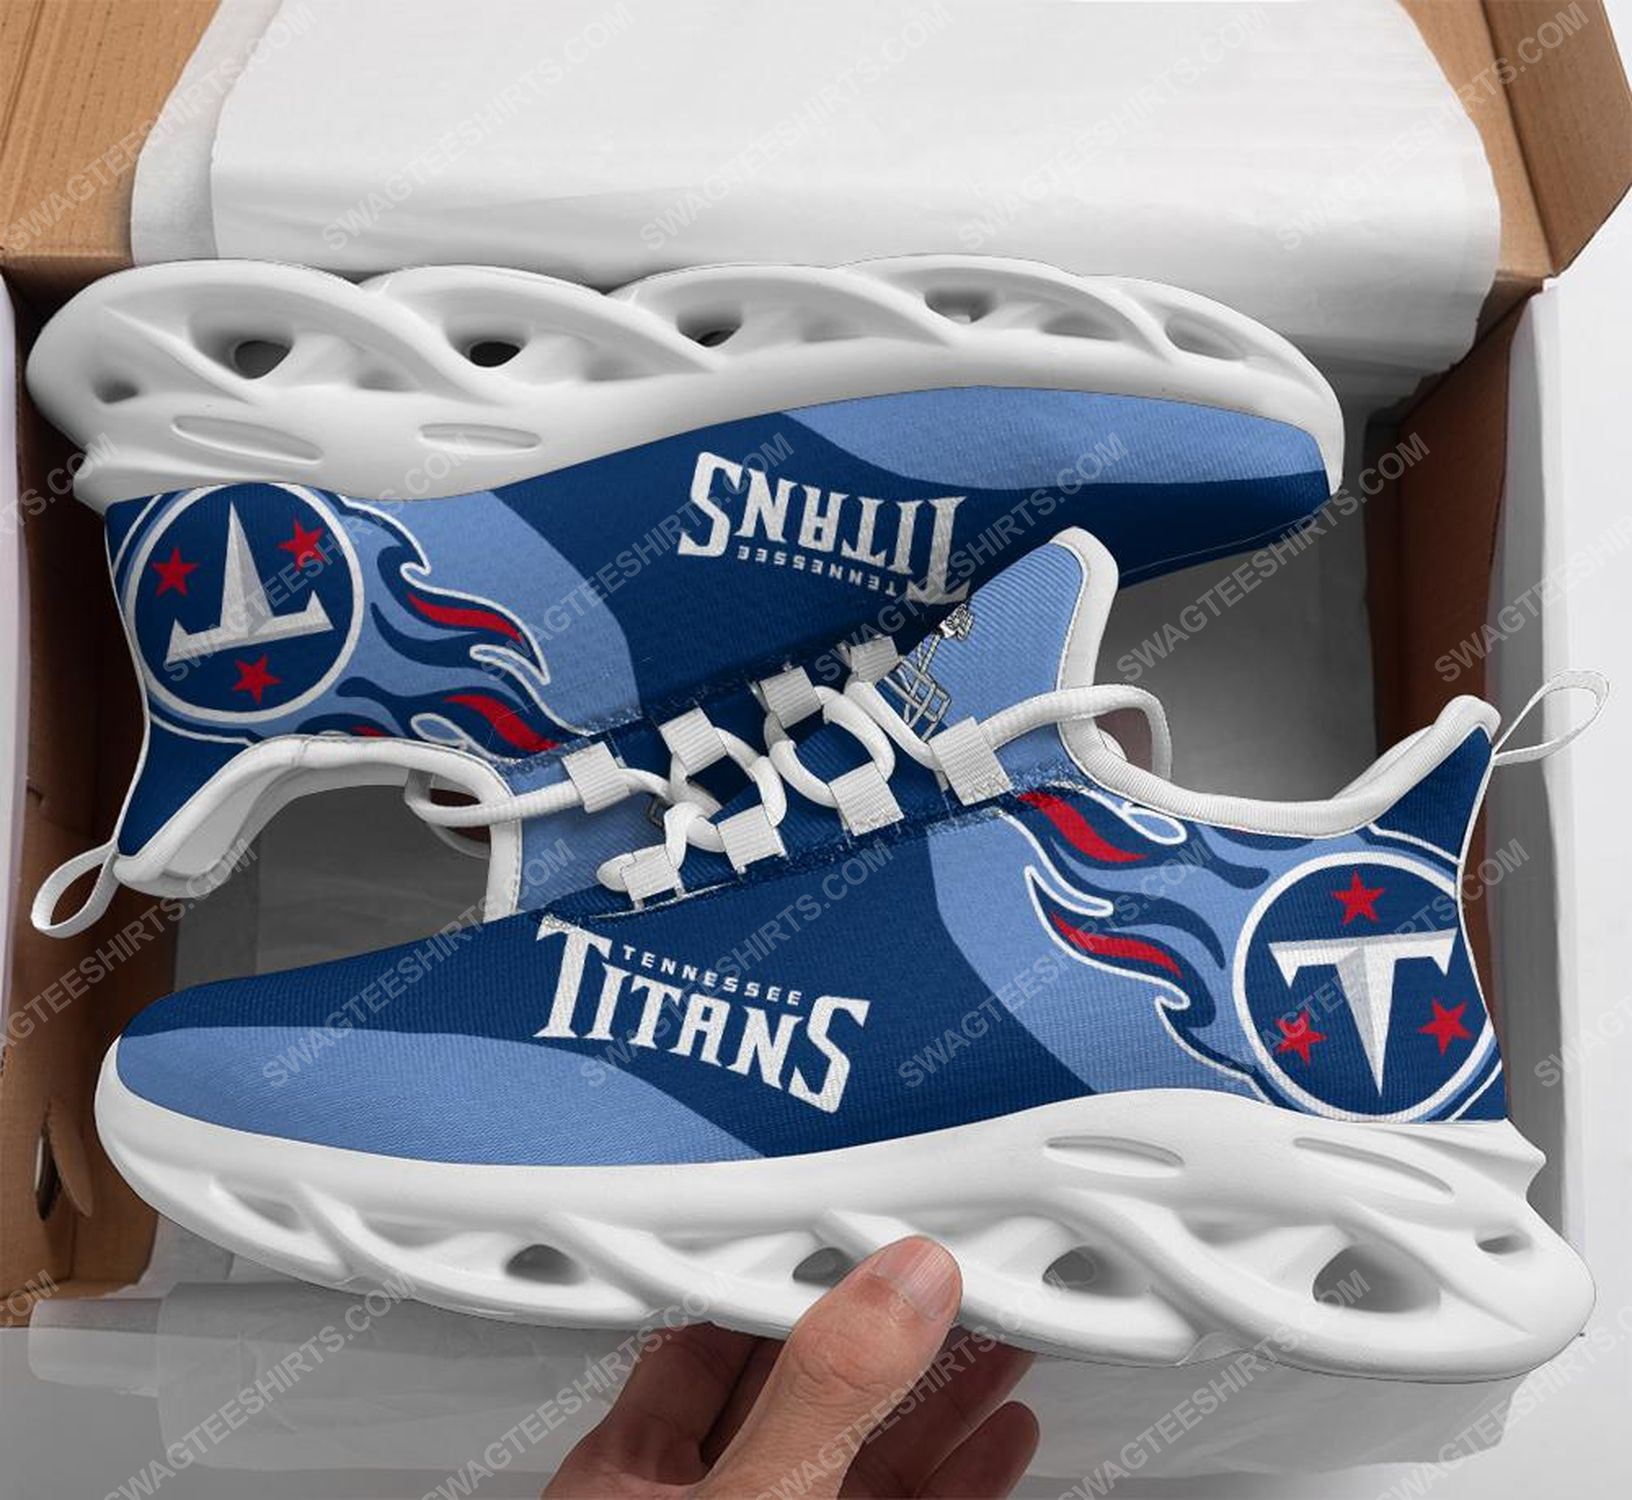 The tennessee titans football team max soul shoes 1